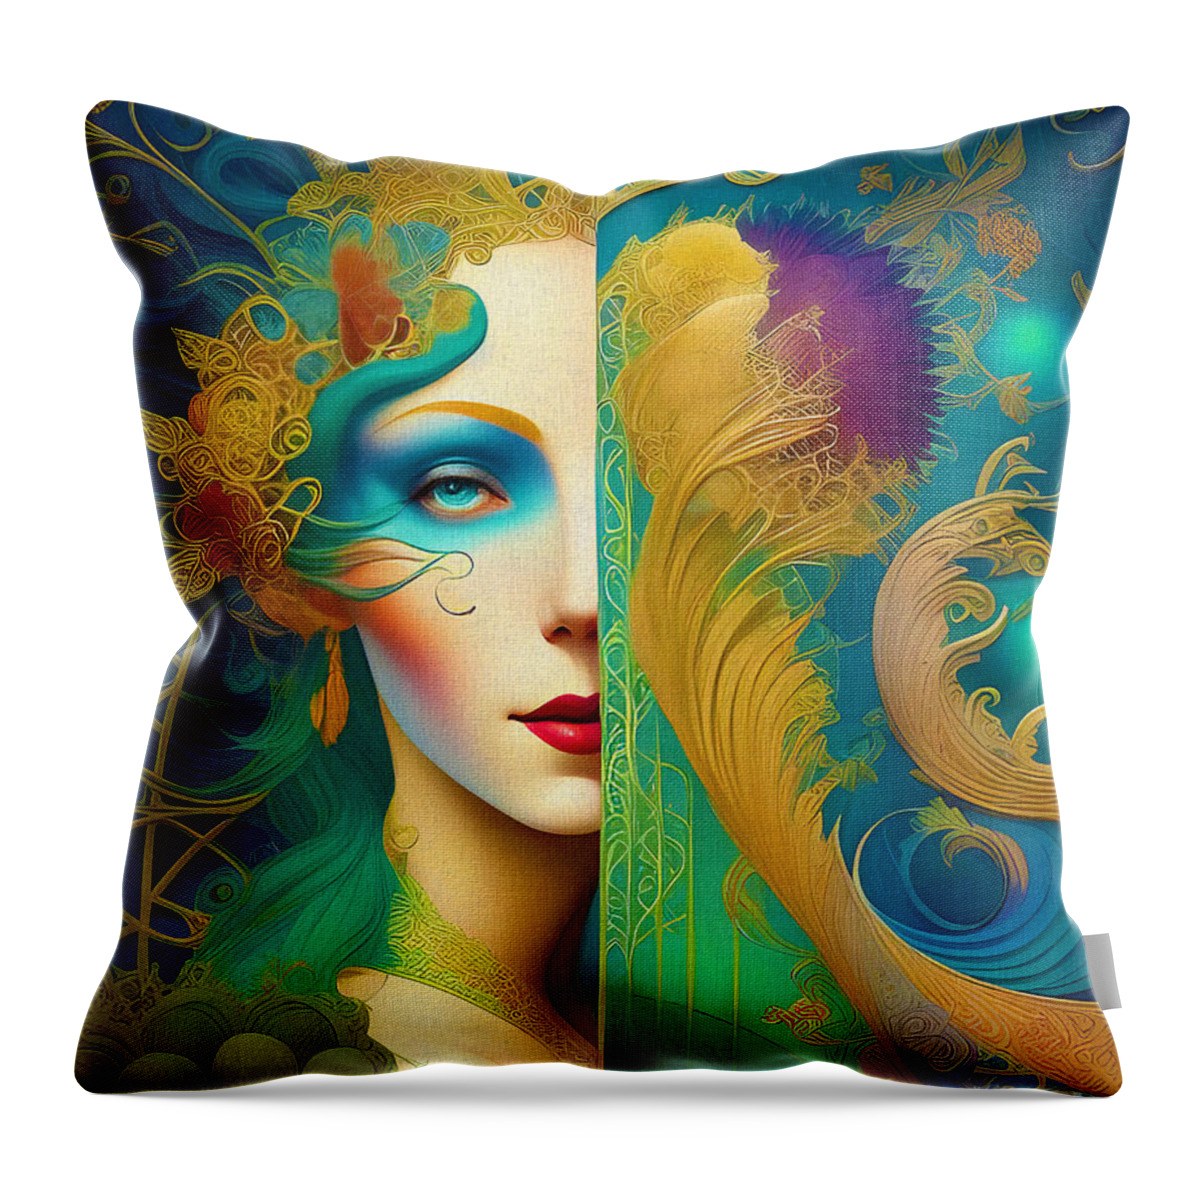 Vkp Throw Pillow featuring the digital art From Behind the Screen by Vicki Pelham